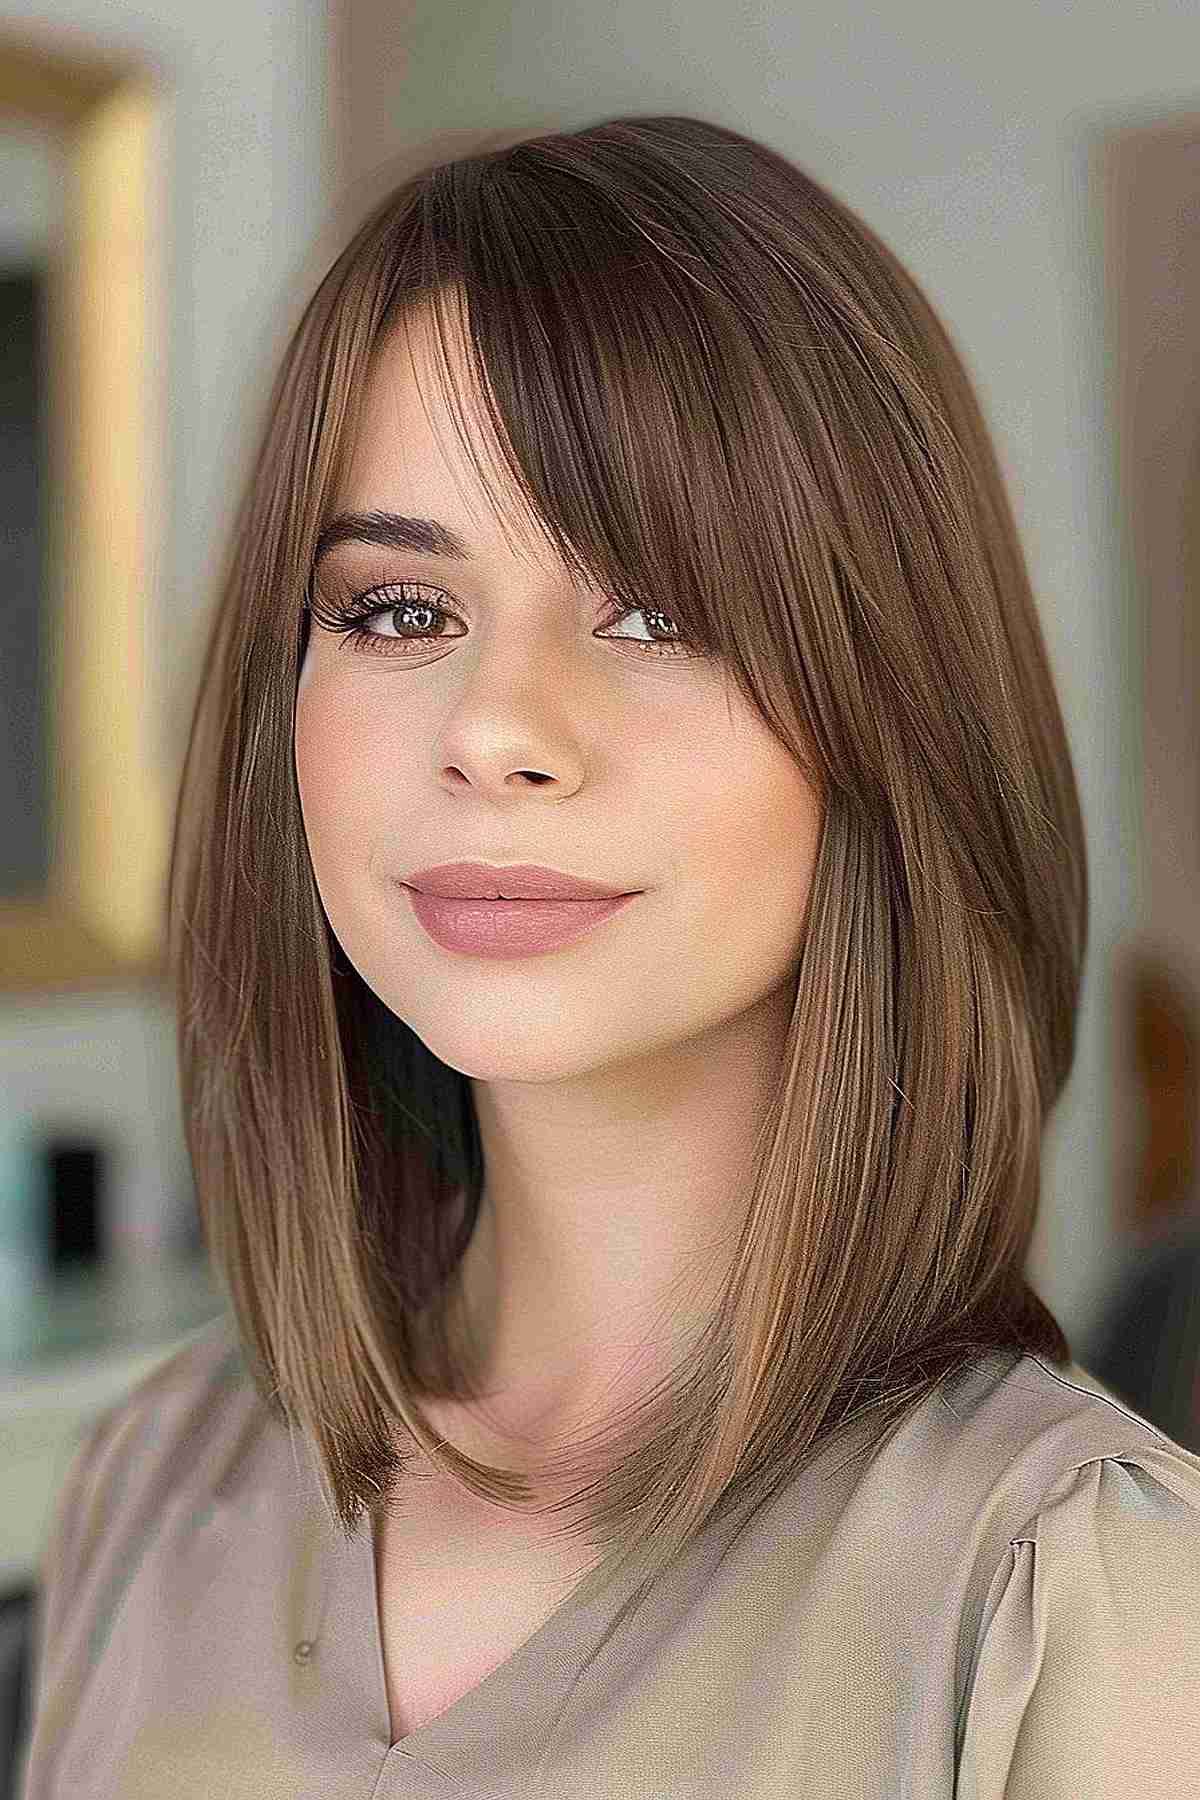 A woman with a round face, long bob and bangs.